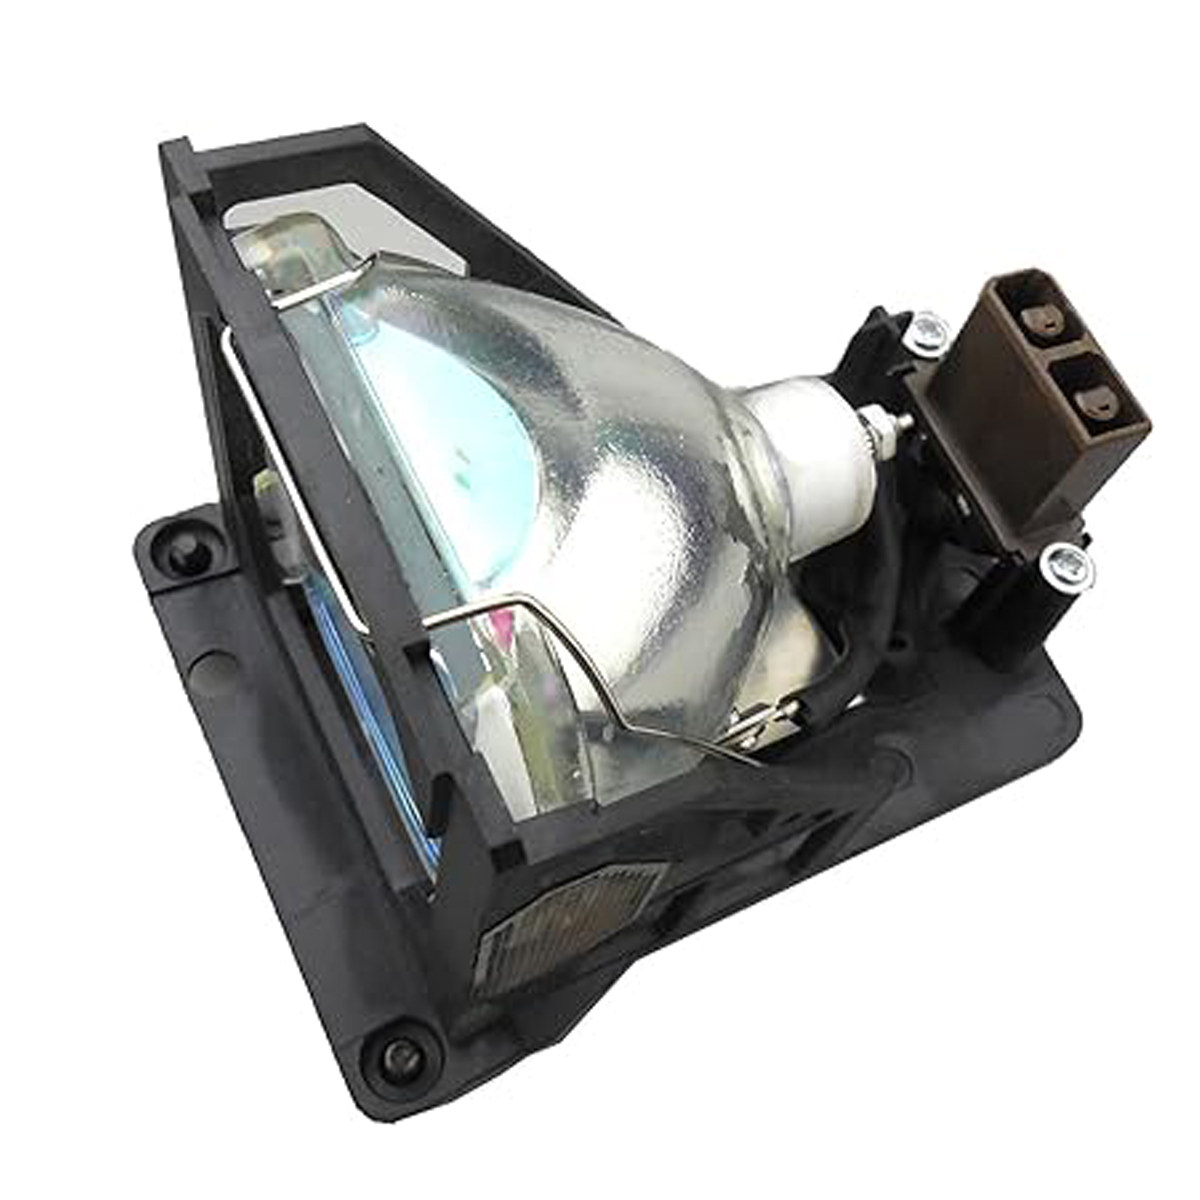 Replacement Projector lamp SP-LAMP-001 For Infocus Projector